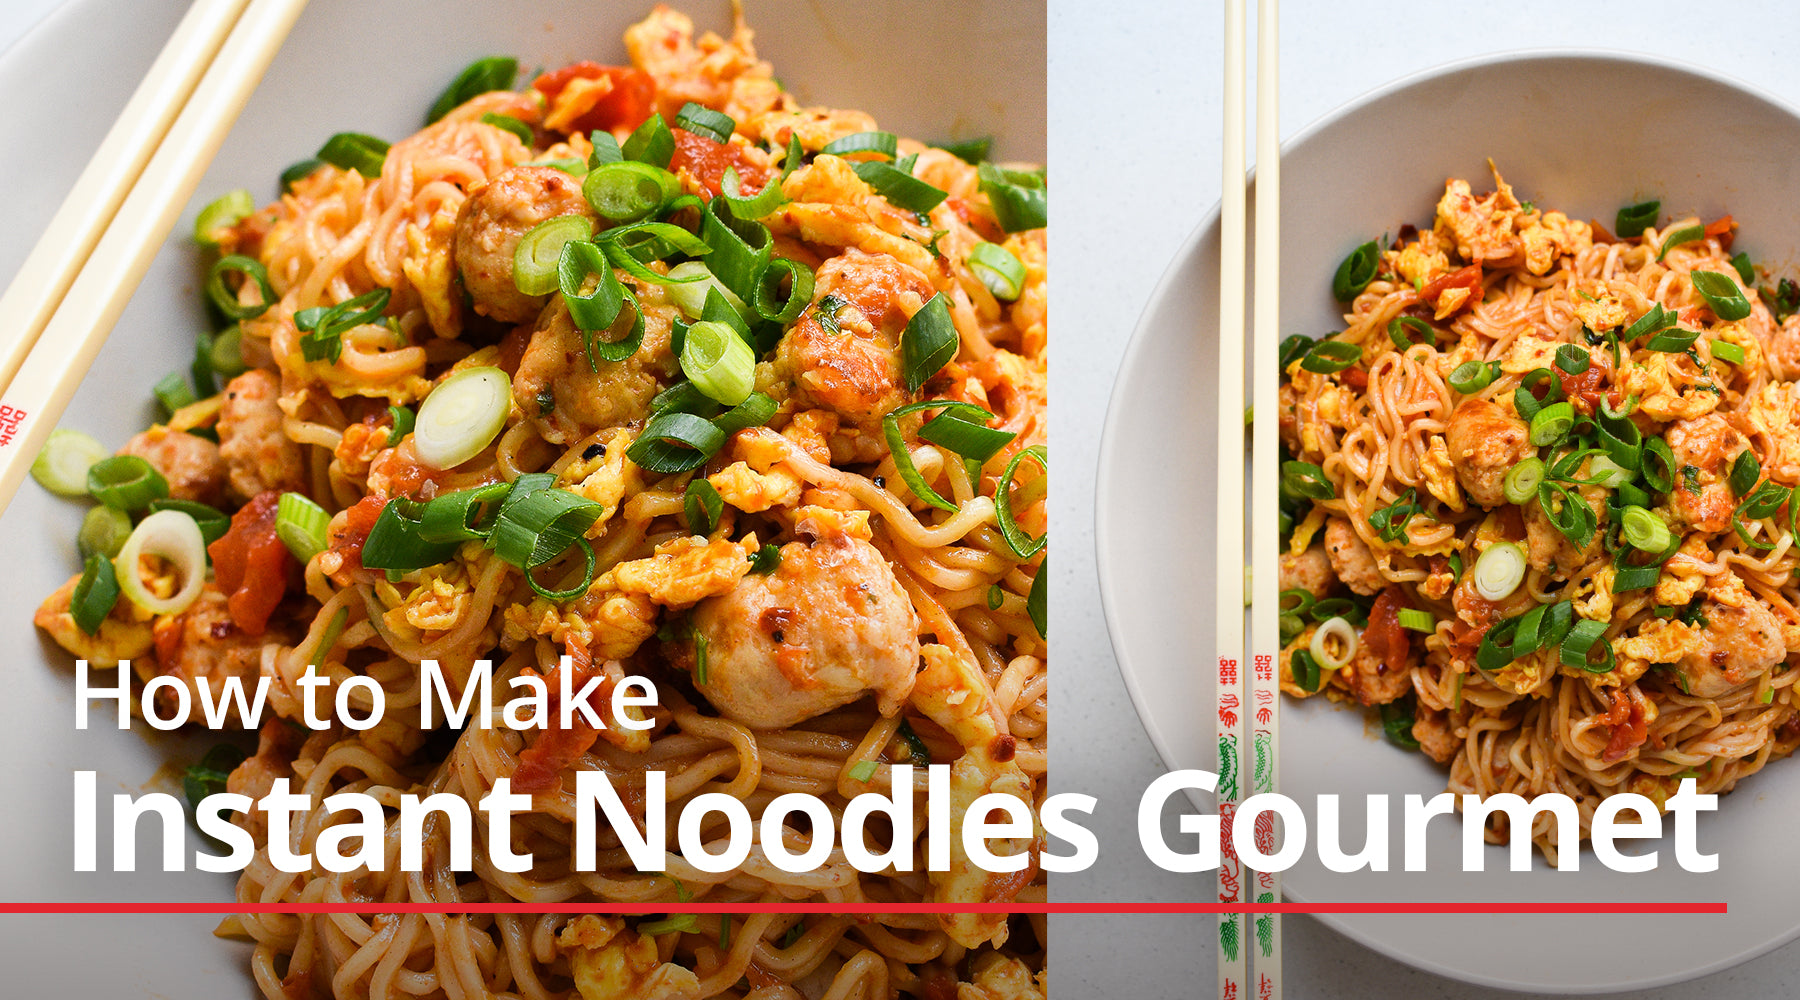 How to Make Instant Noodles Gourmet with Kellogg's